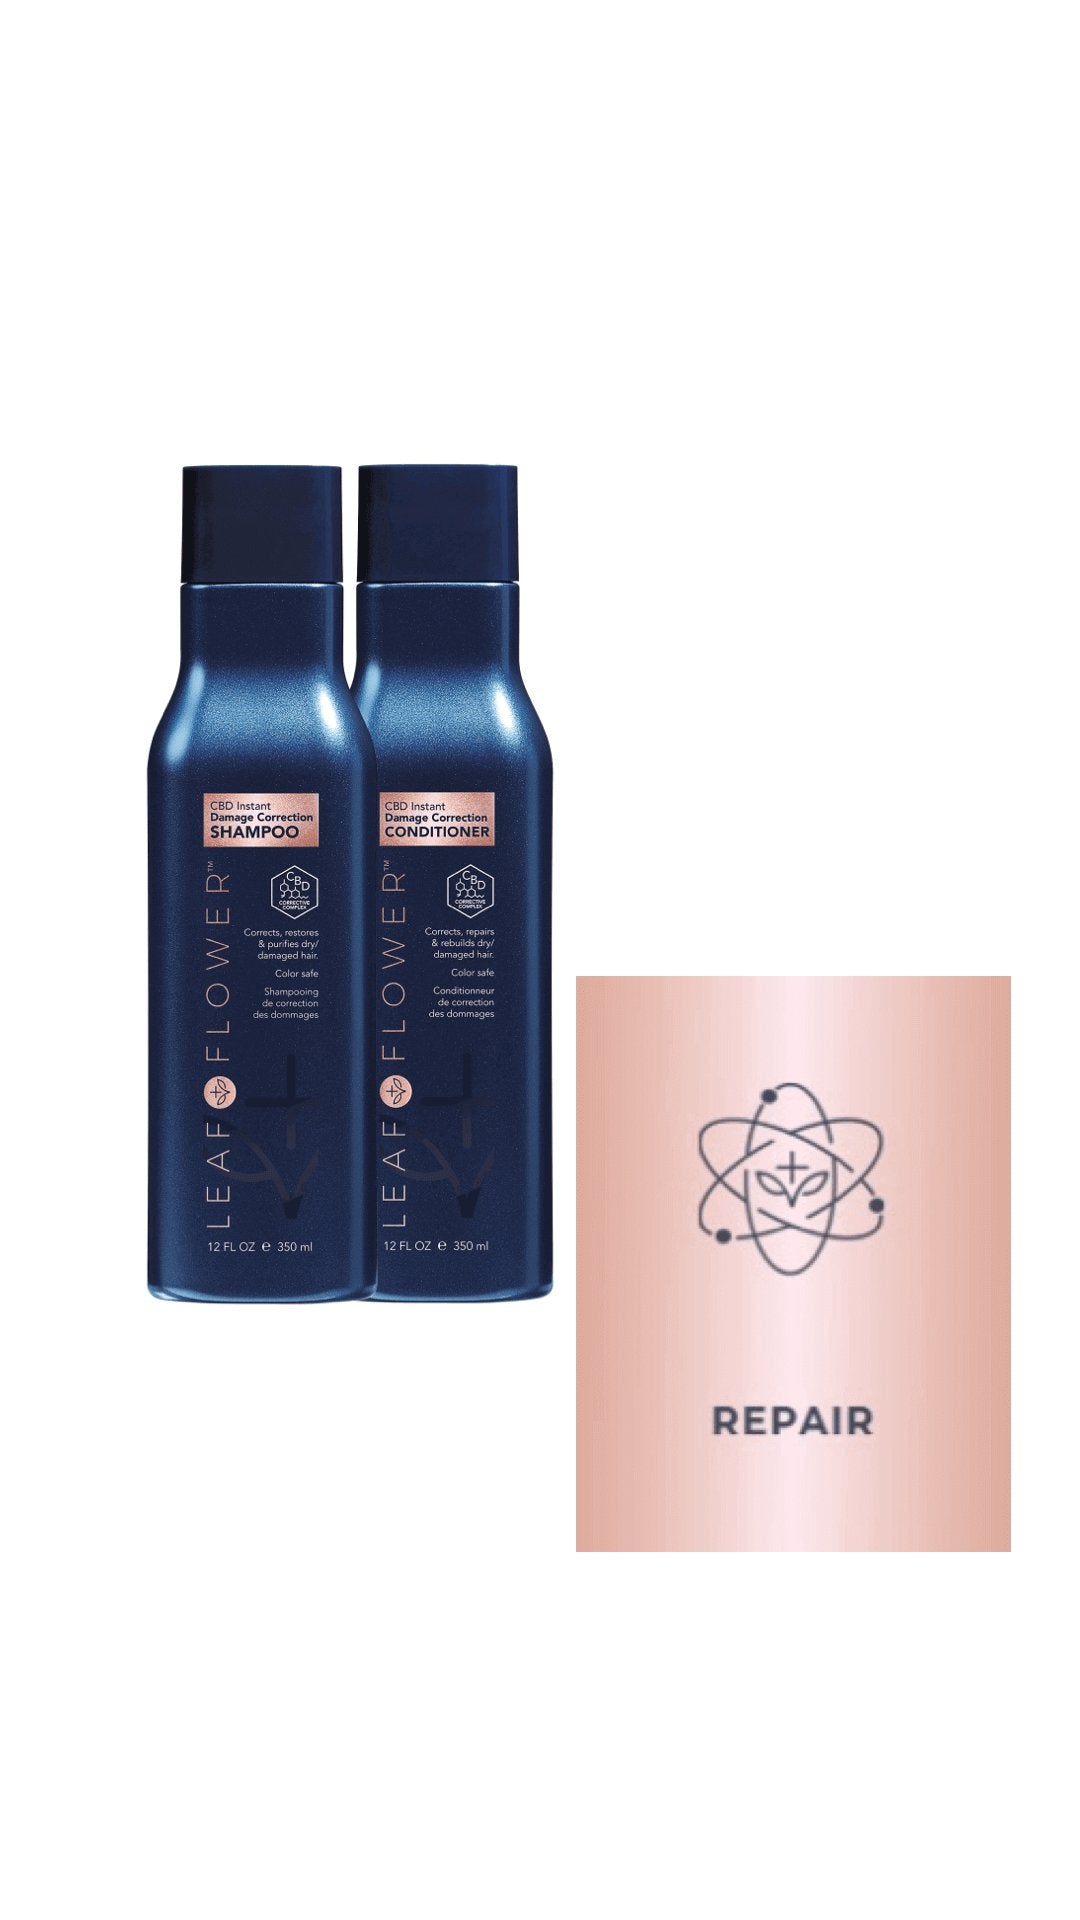 Leaf and Flower Instant Damage Correction Shampoo & Conditioner Correction Duo Shampoo & Conditioner Sets Simply Colour